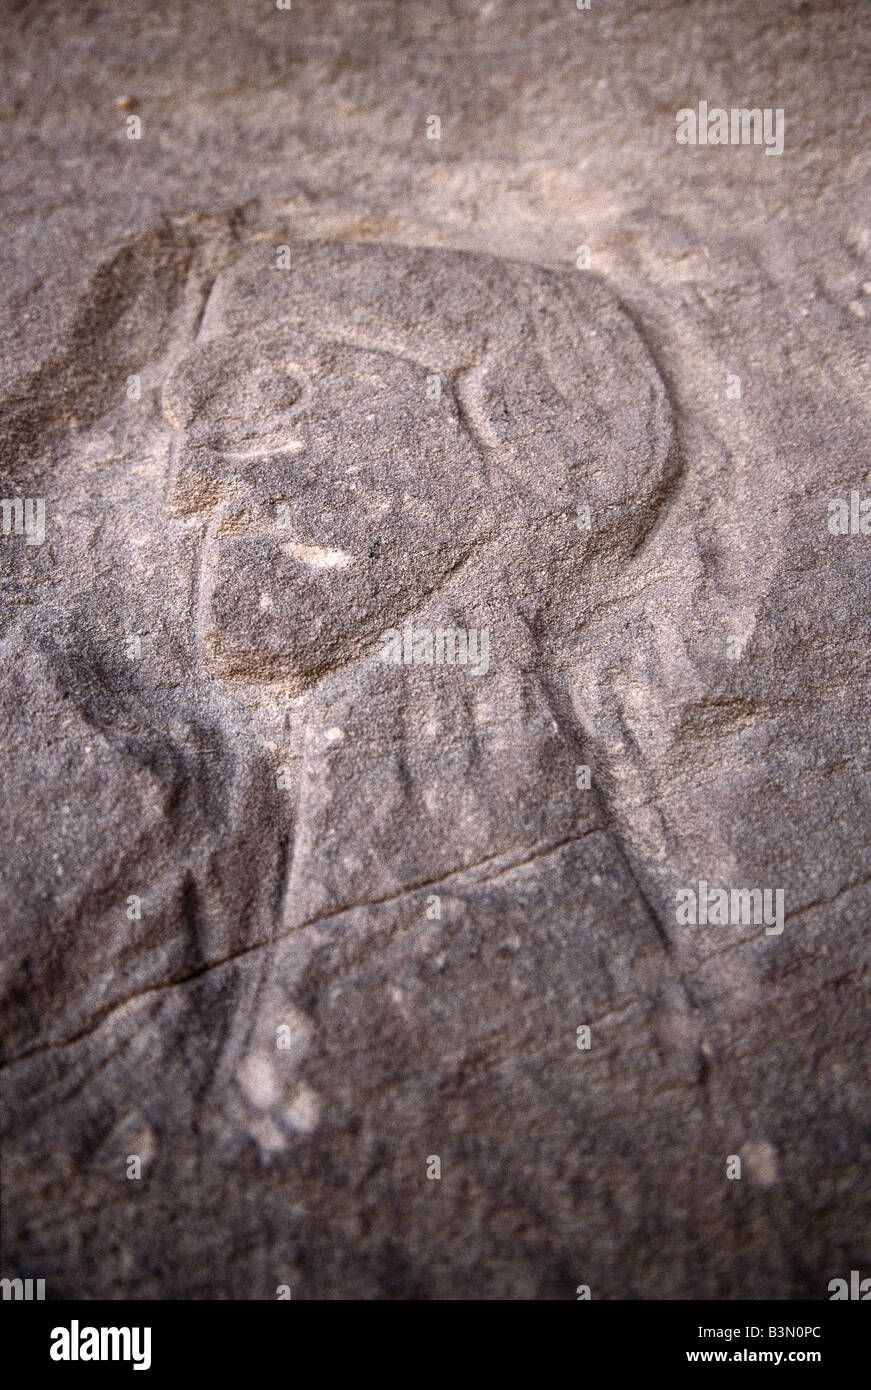 Rock carving depicts a man's portrait at an under-hang in a mountain at Wadi Al Hayat, Fezzan, Libya. Stock Photo